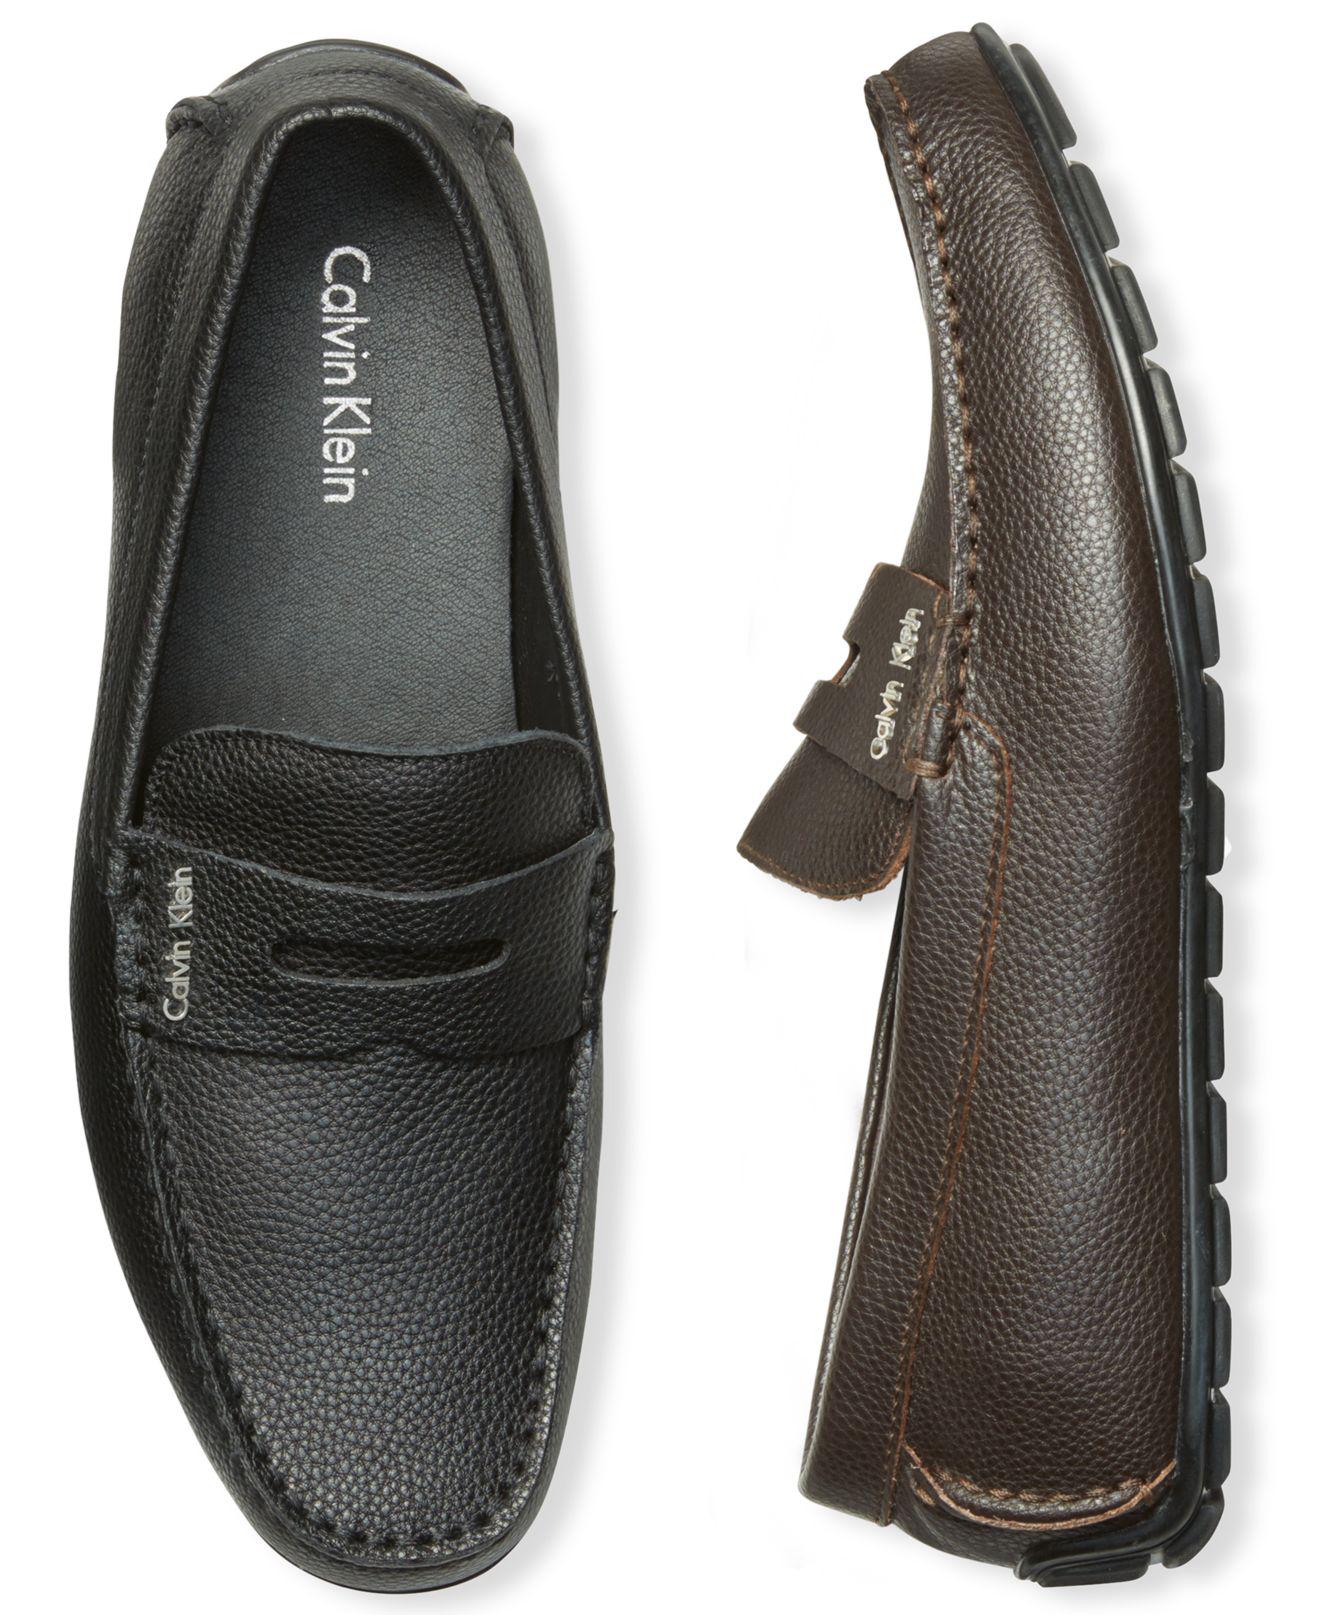 calvin klein leather loafers